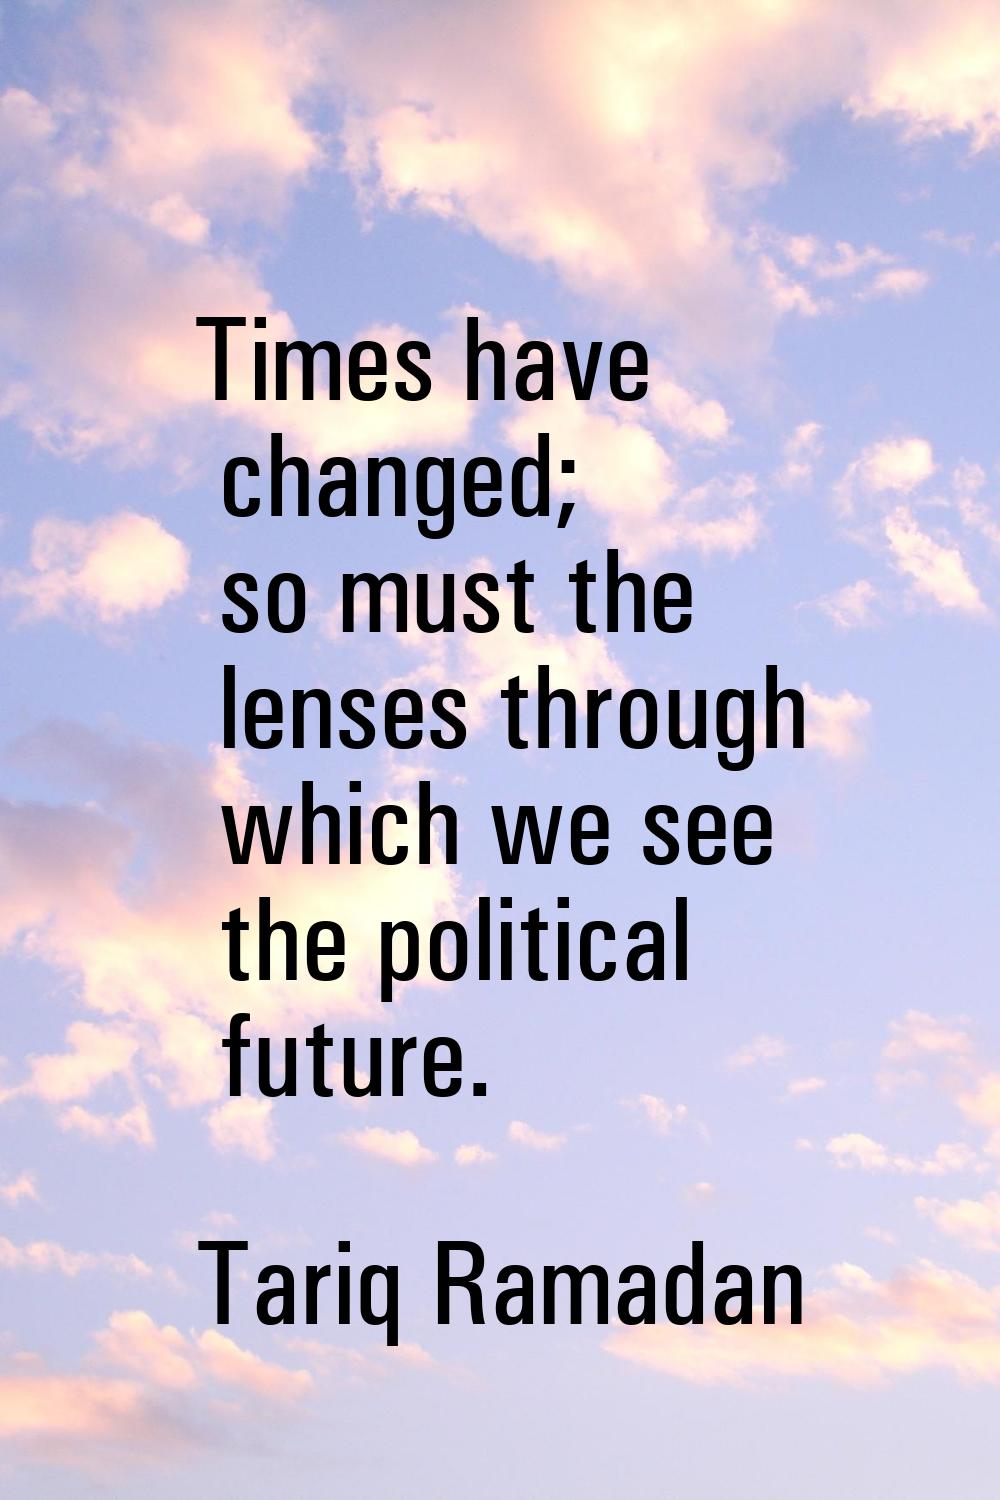 Times have changed; so must the lenses through which we see the political future.